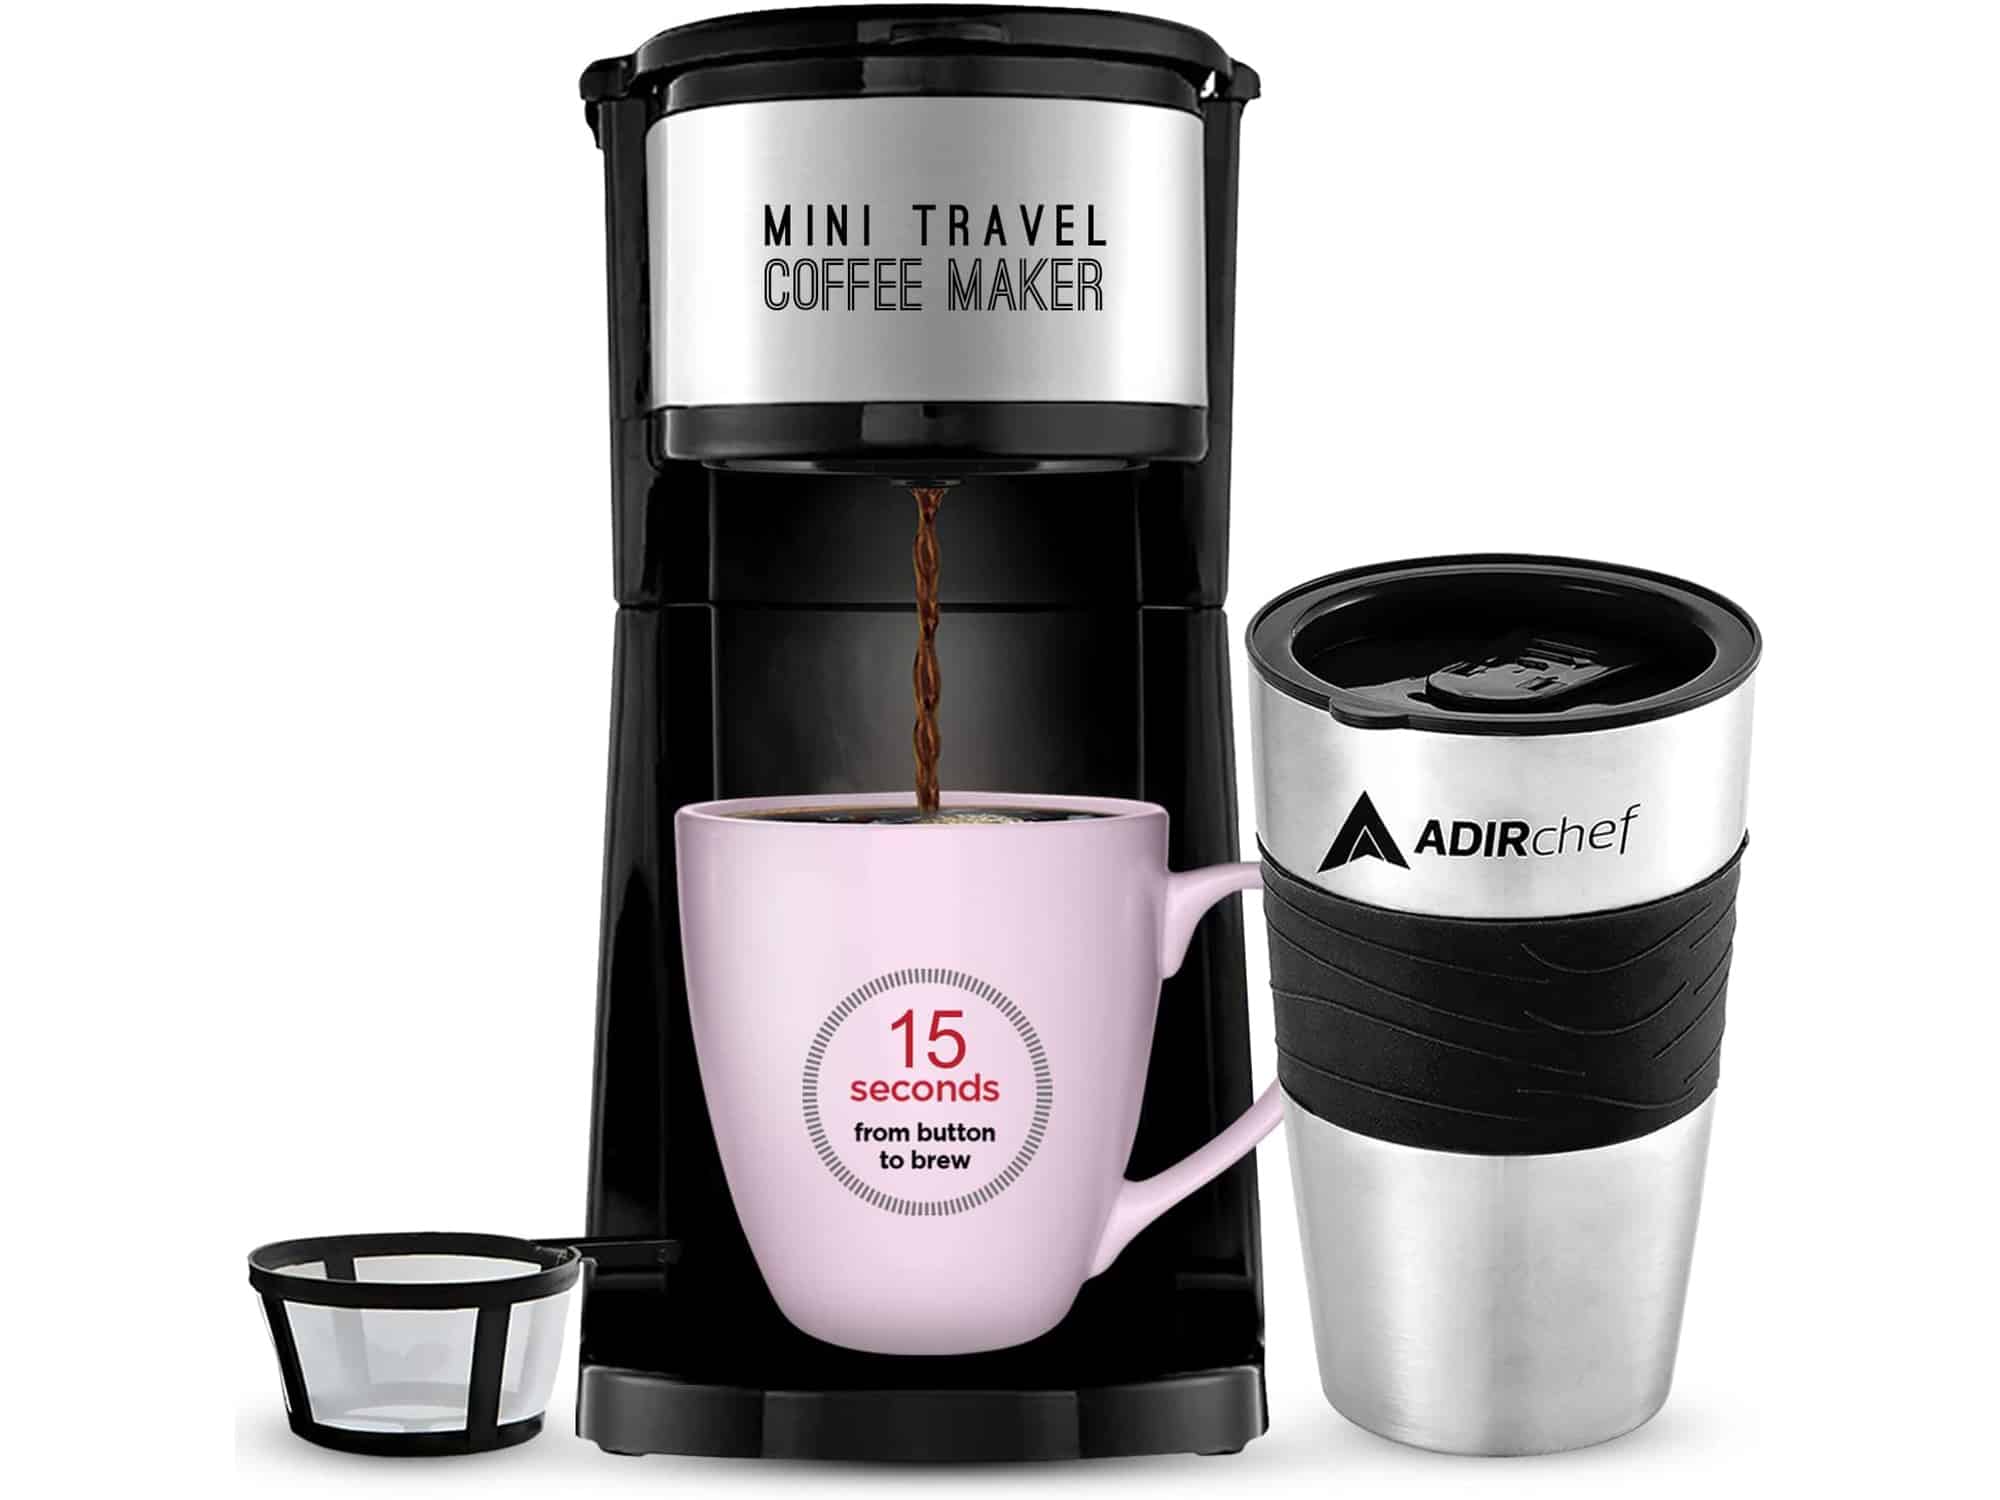 ADIRchef Single Serve Mini Travel Coffee Maker & 15 oz. Travel Mug Coffee Tumbler & Reusable Filter For Home, Office, Camping, Portable Small and Compact (Black)